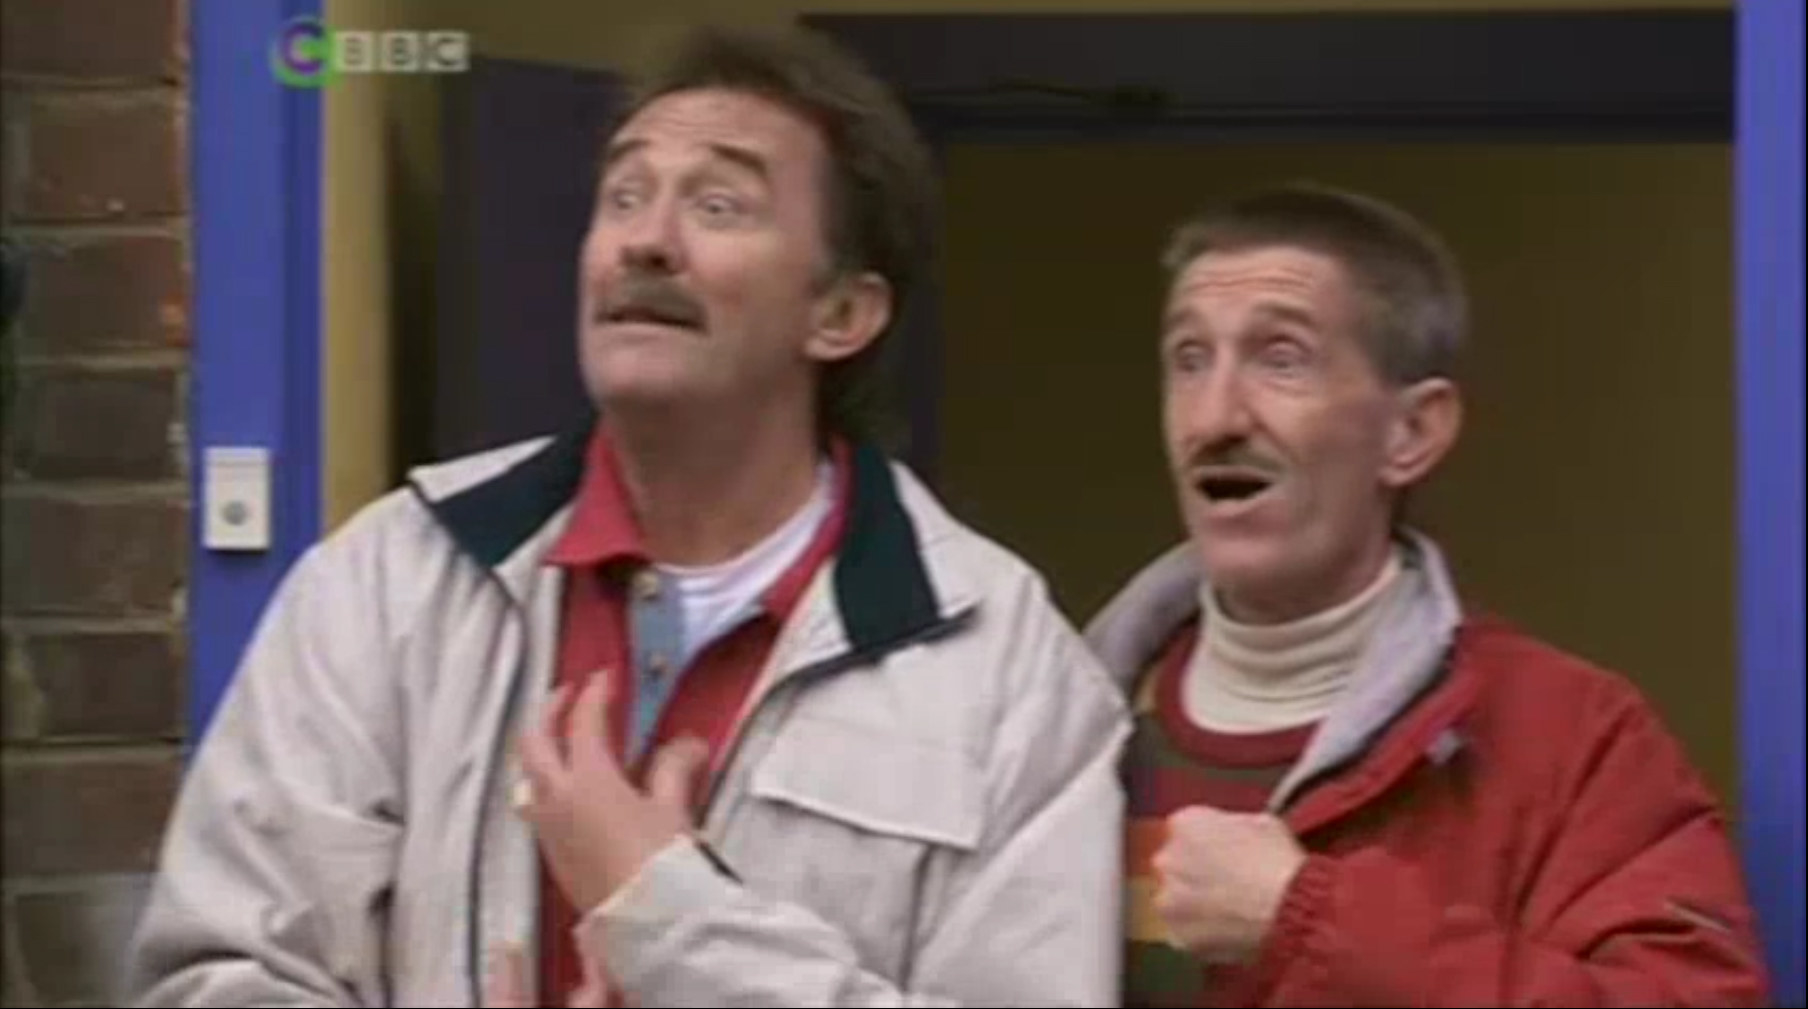 paul and barry chuckle standing in a doorway looking alarmed